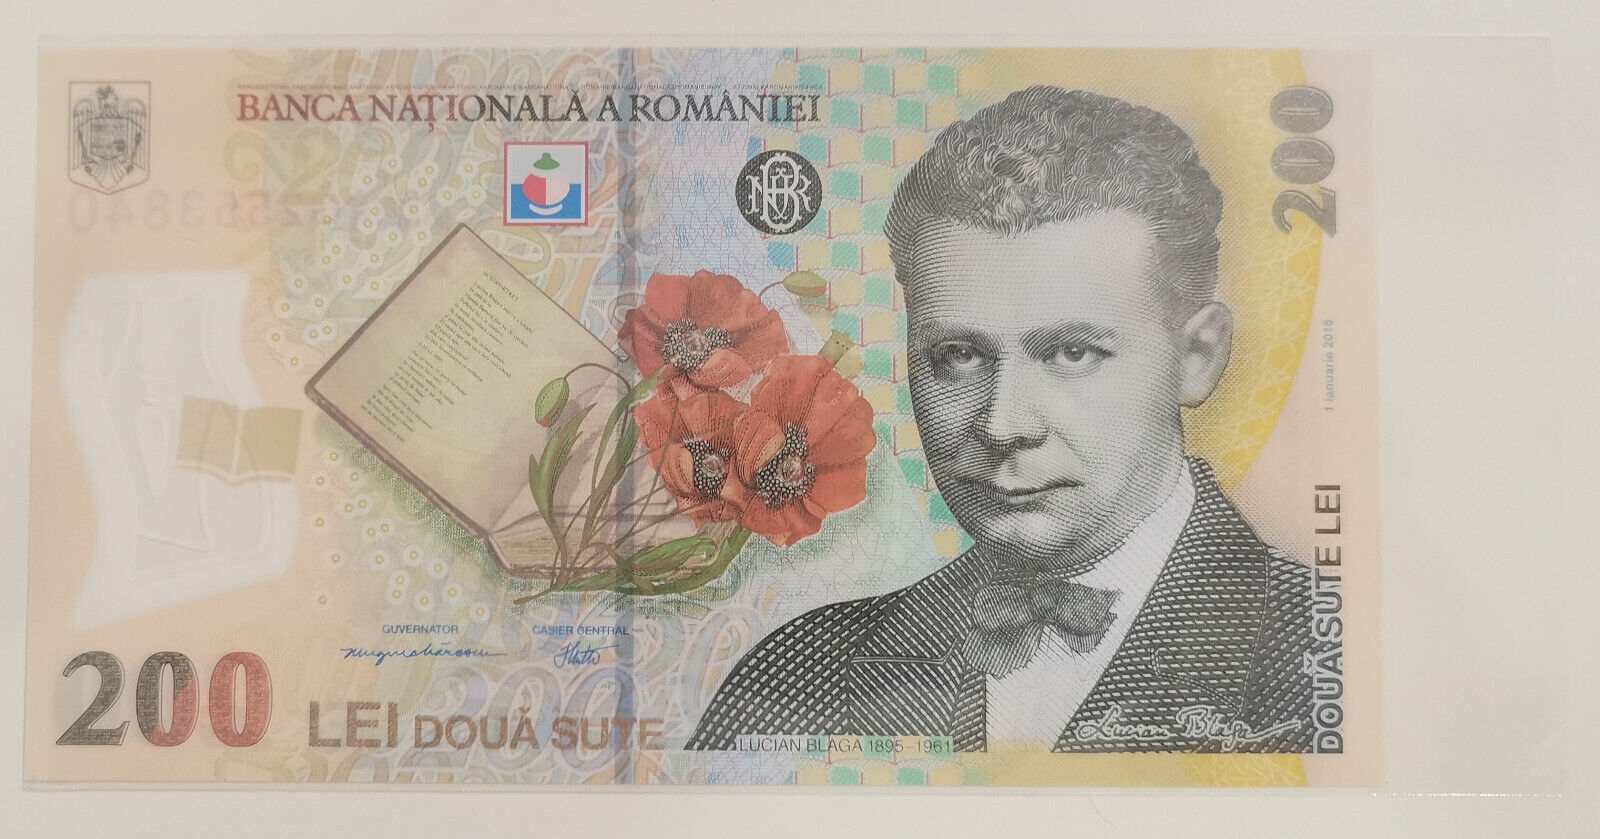 Romania 200 Lei - 2022 UNC polymer banknote (with Crown)